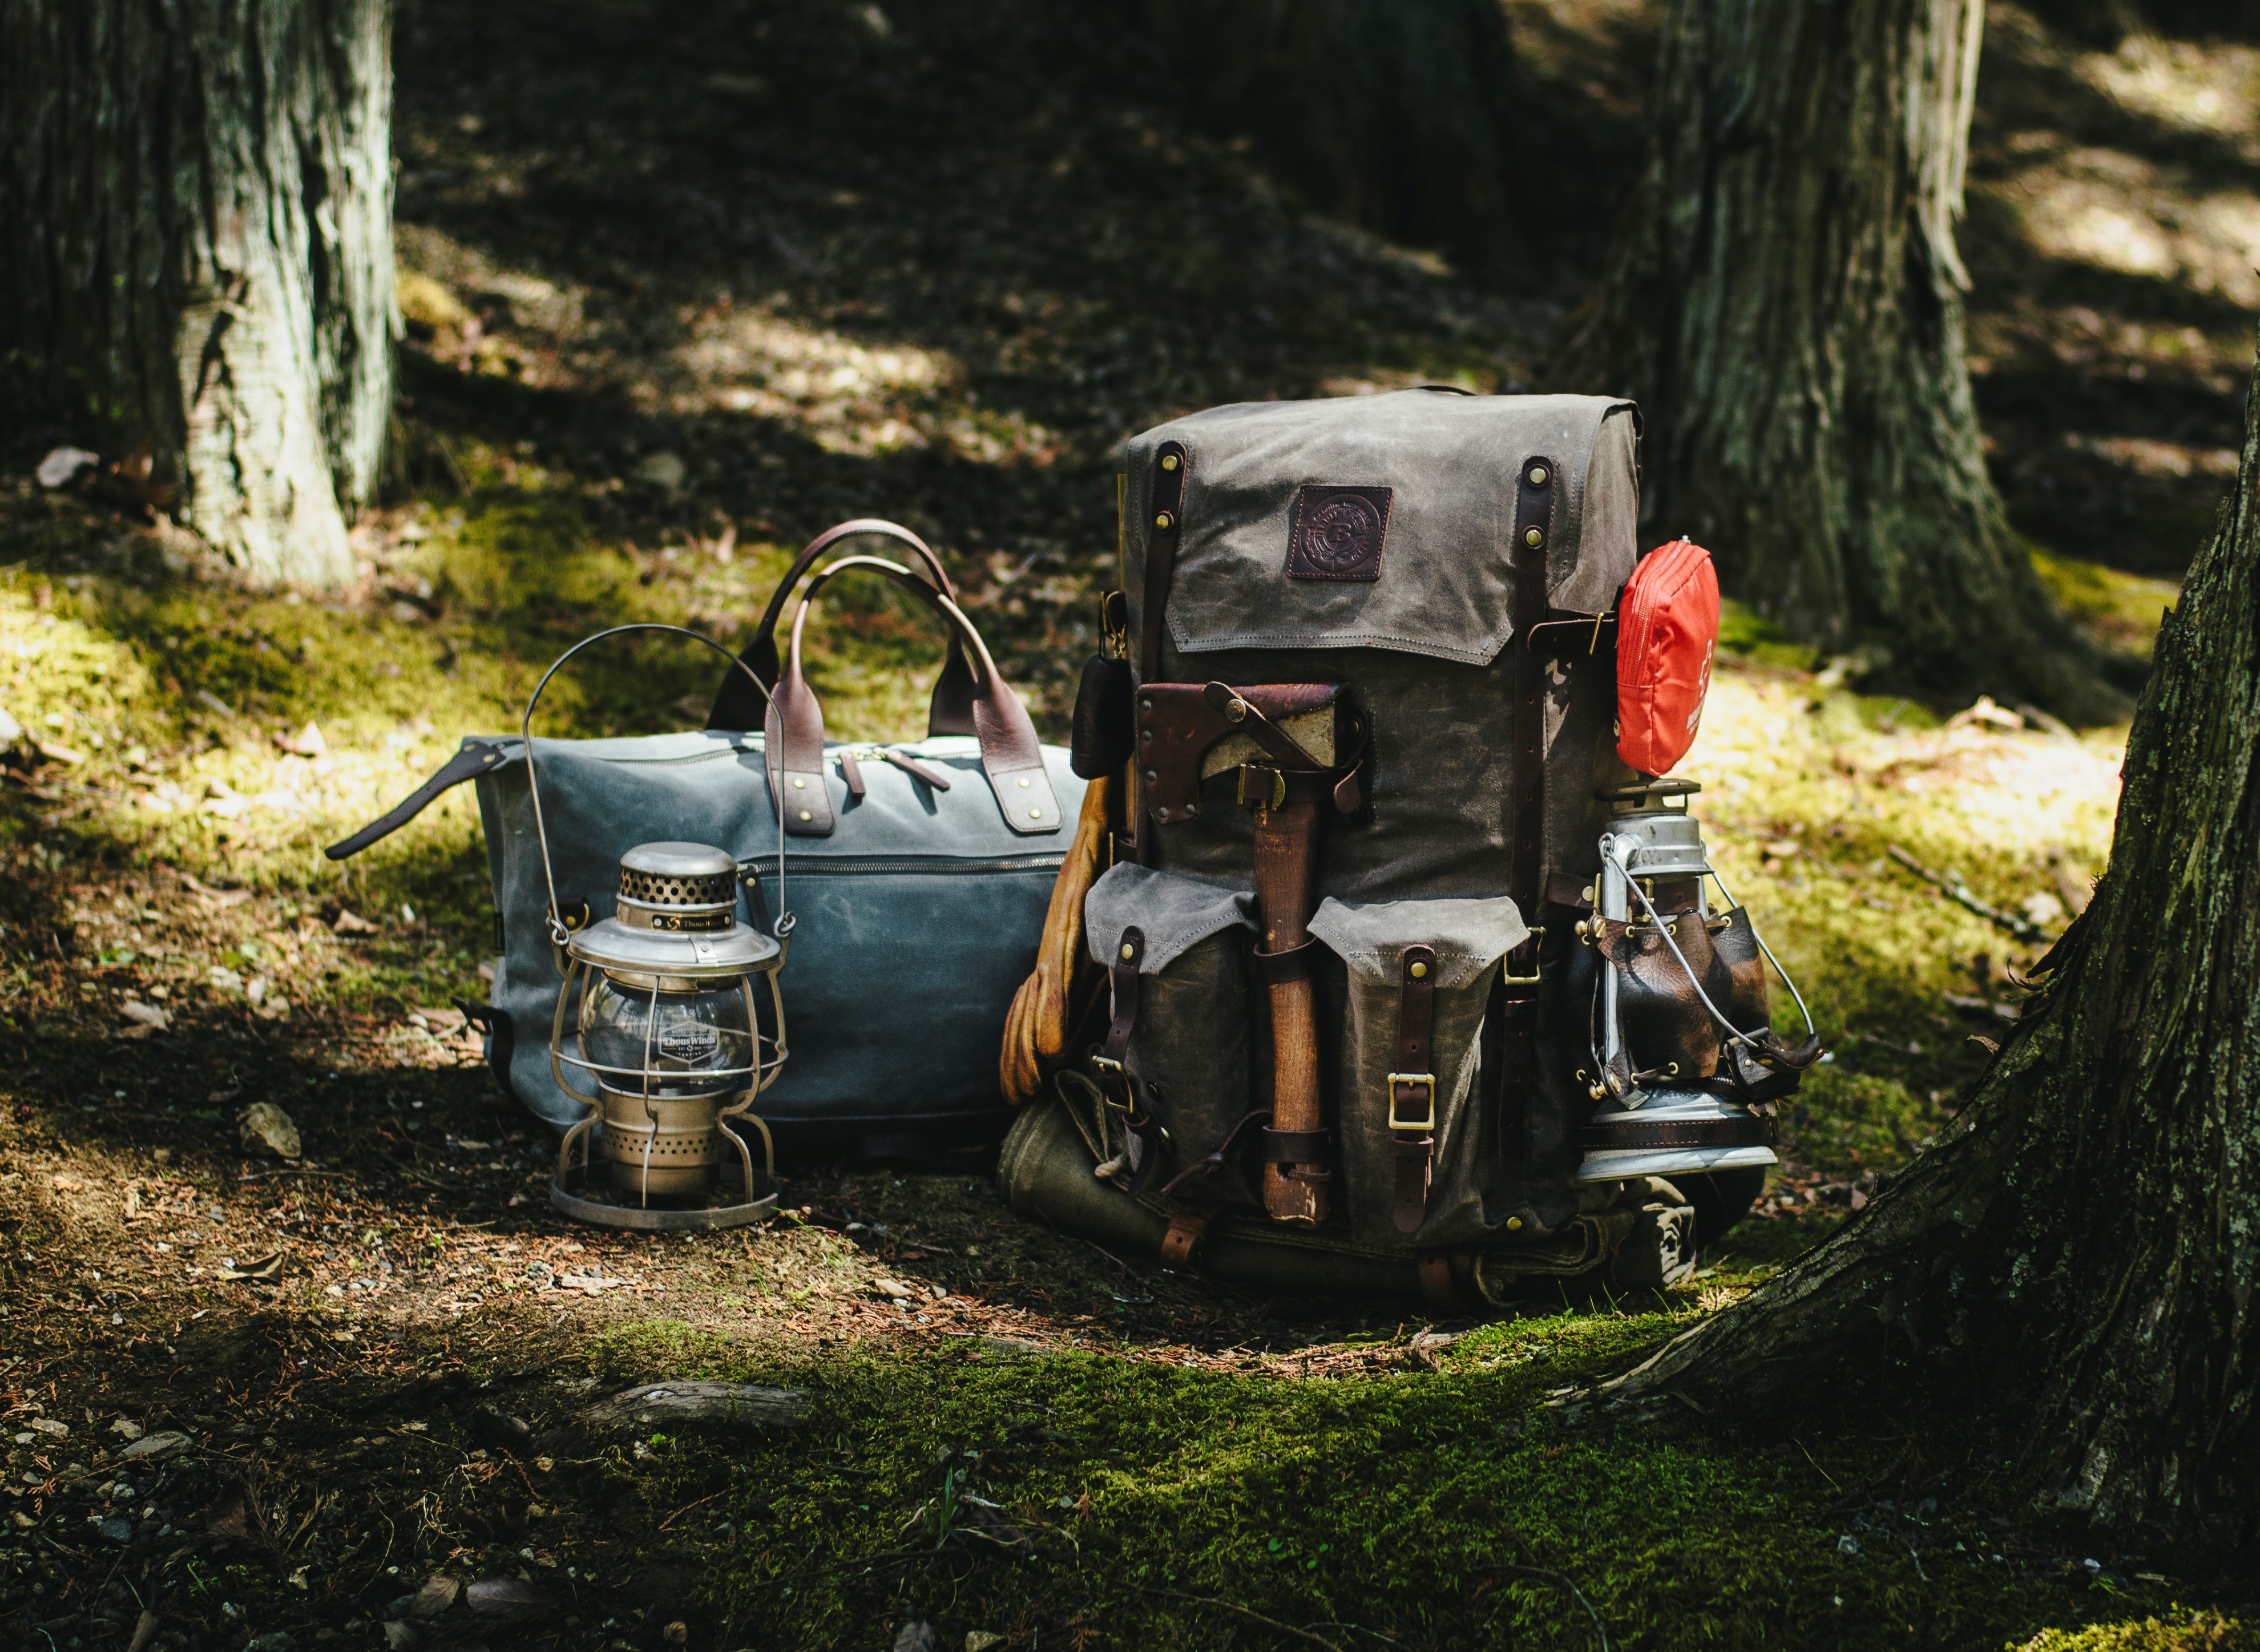 Authentic waxed canvas bags - backpack, messenger bag, duffle bag,  motorcycle bag and bushcraft back